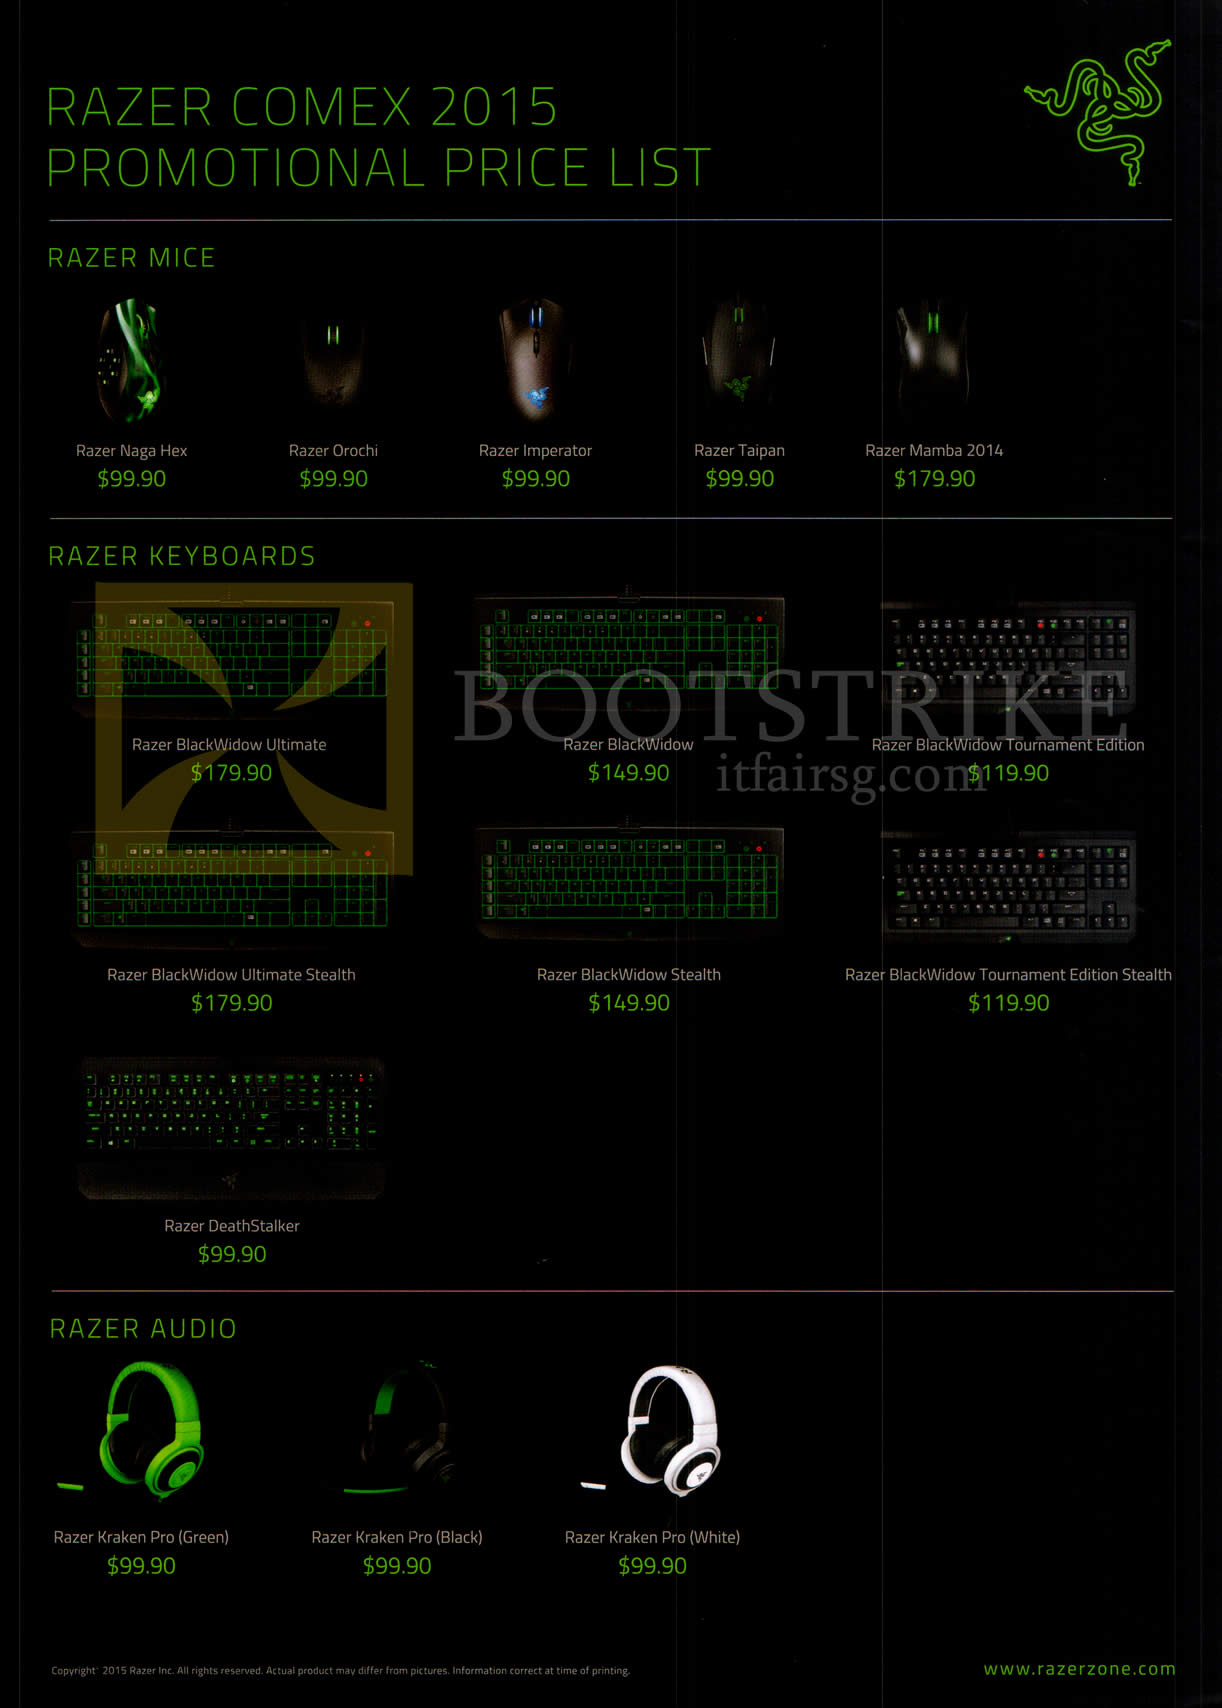 COMEX 2015 price list image brochure of Razer Gaming Mouse Keyboards, Headsets, Naga Hex, Orochi, Imperator, Taipan, Mamba 2014, Blackwidow, Stealth, Tournament, DeathStalker, Kraker Pro Green, Black, White